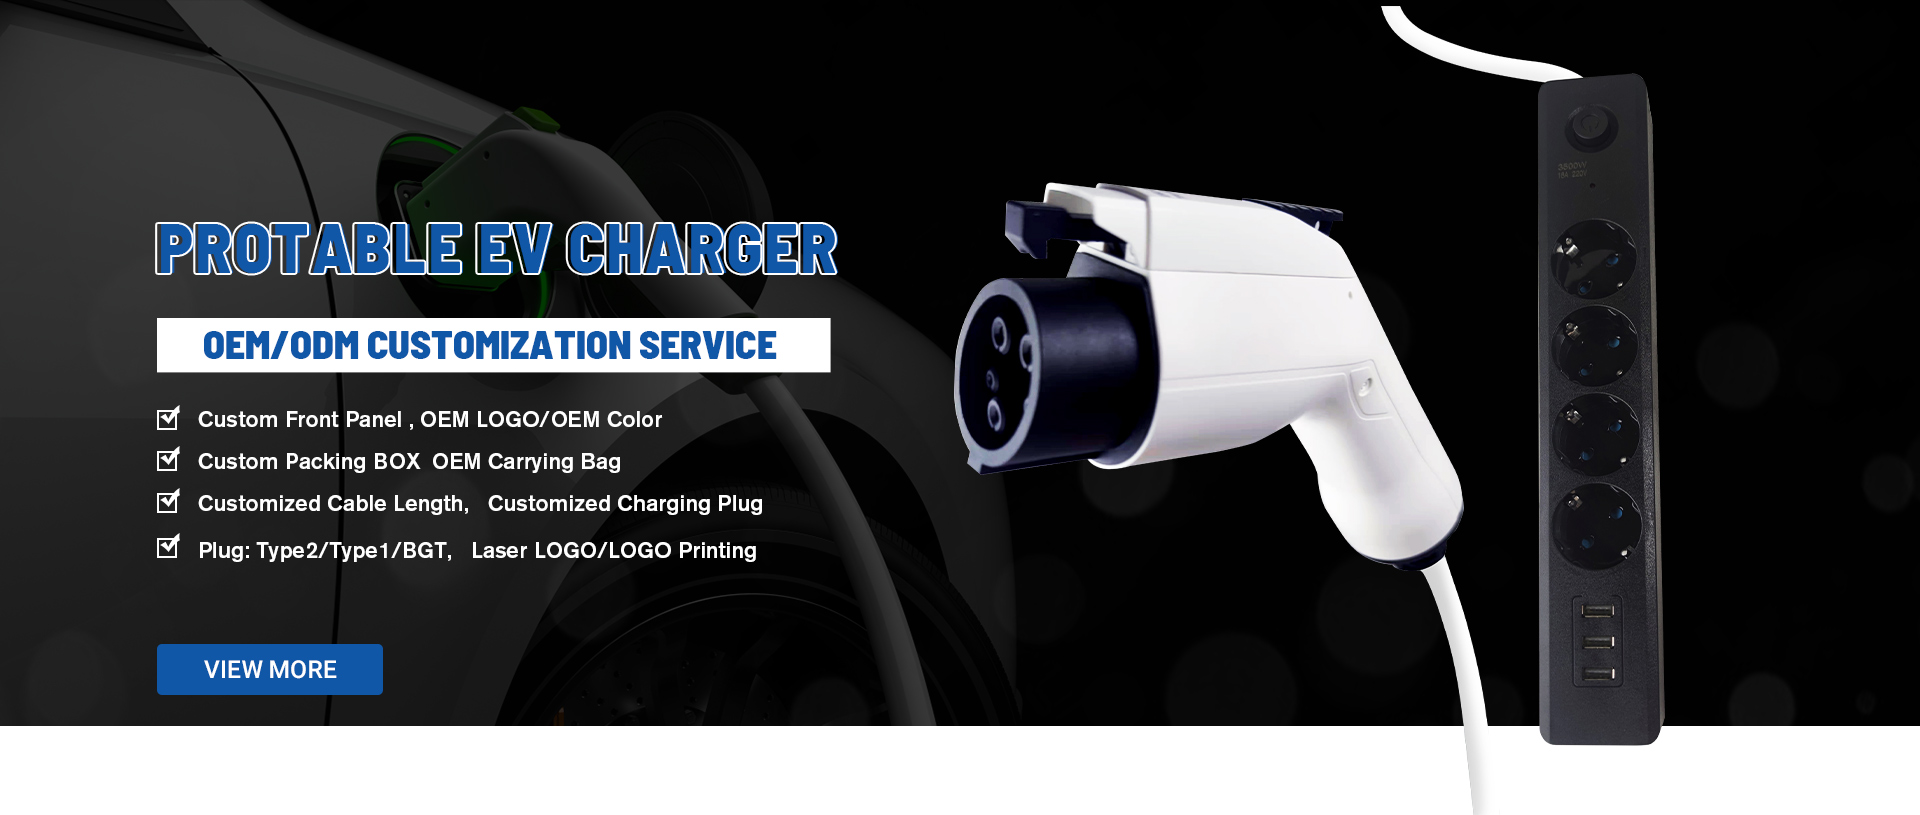 EN 32A 3-Phase AC Car Charging Cable On Vehicle Side